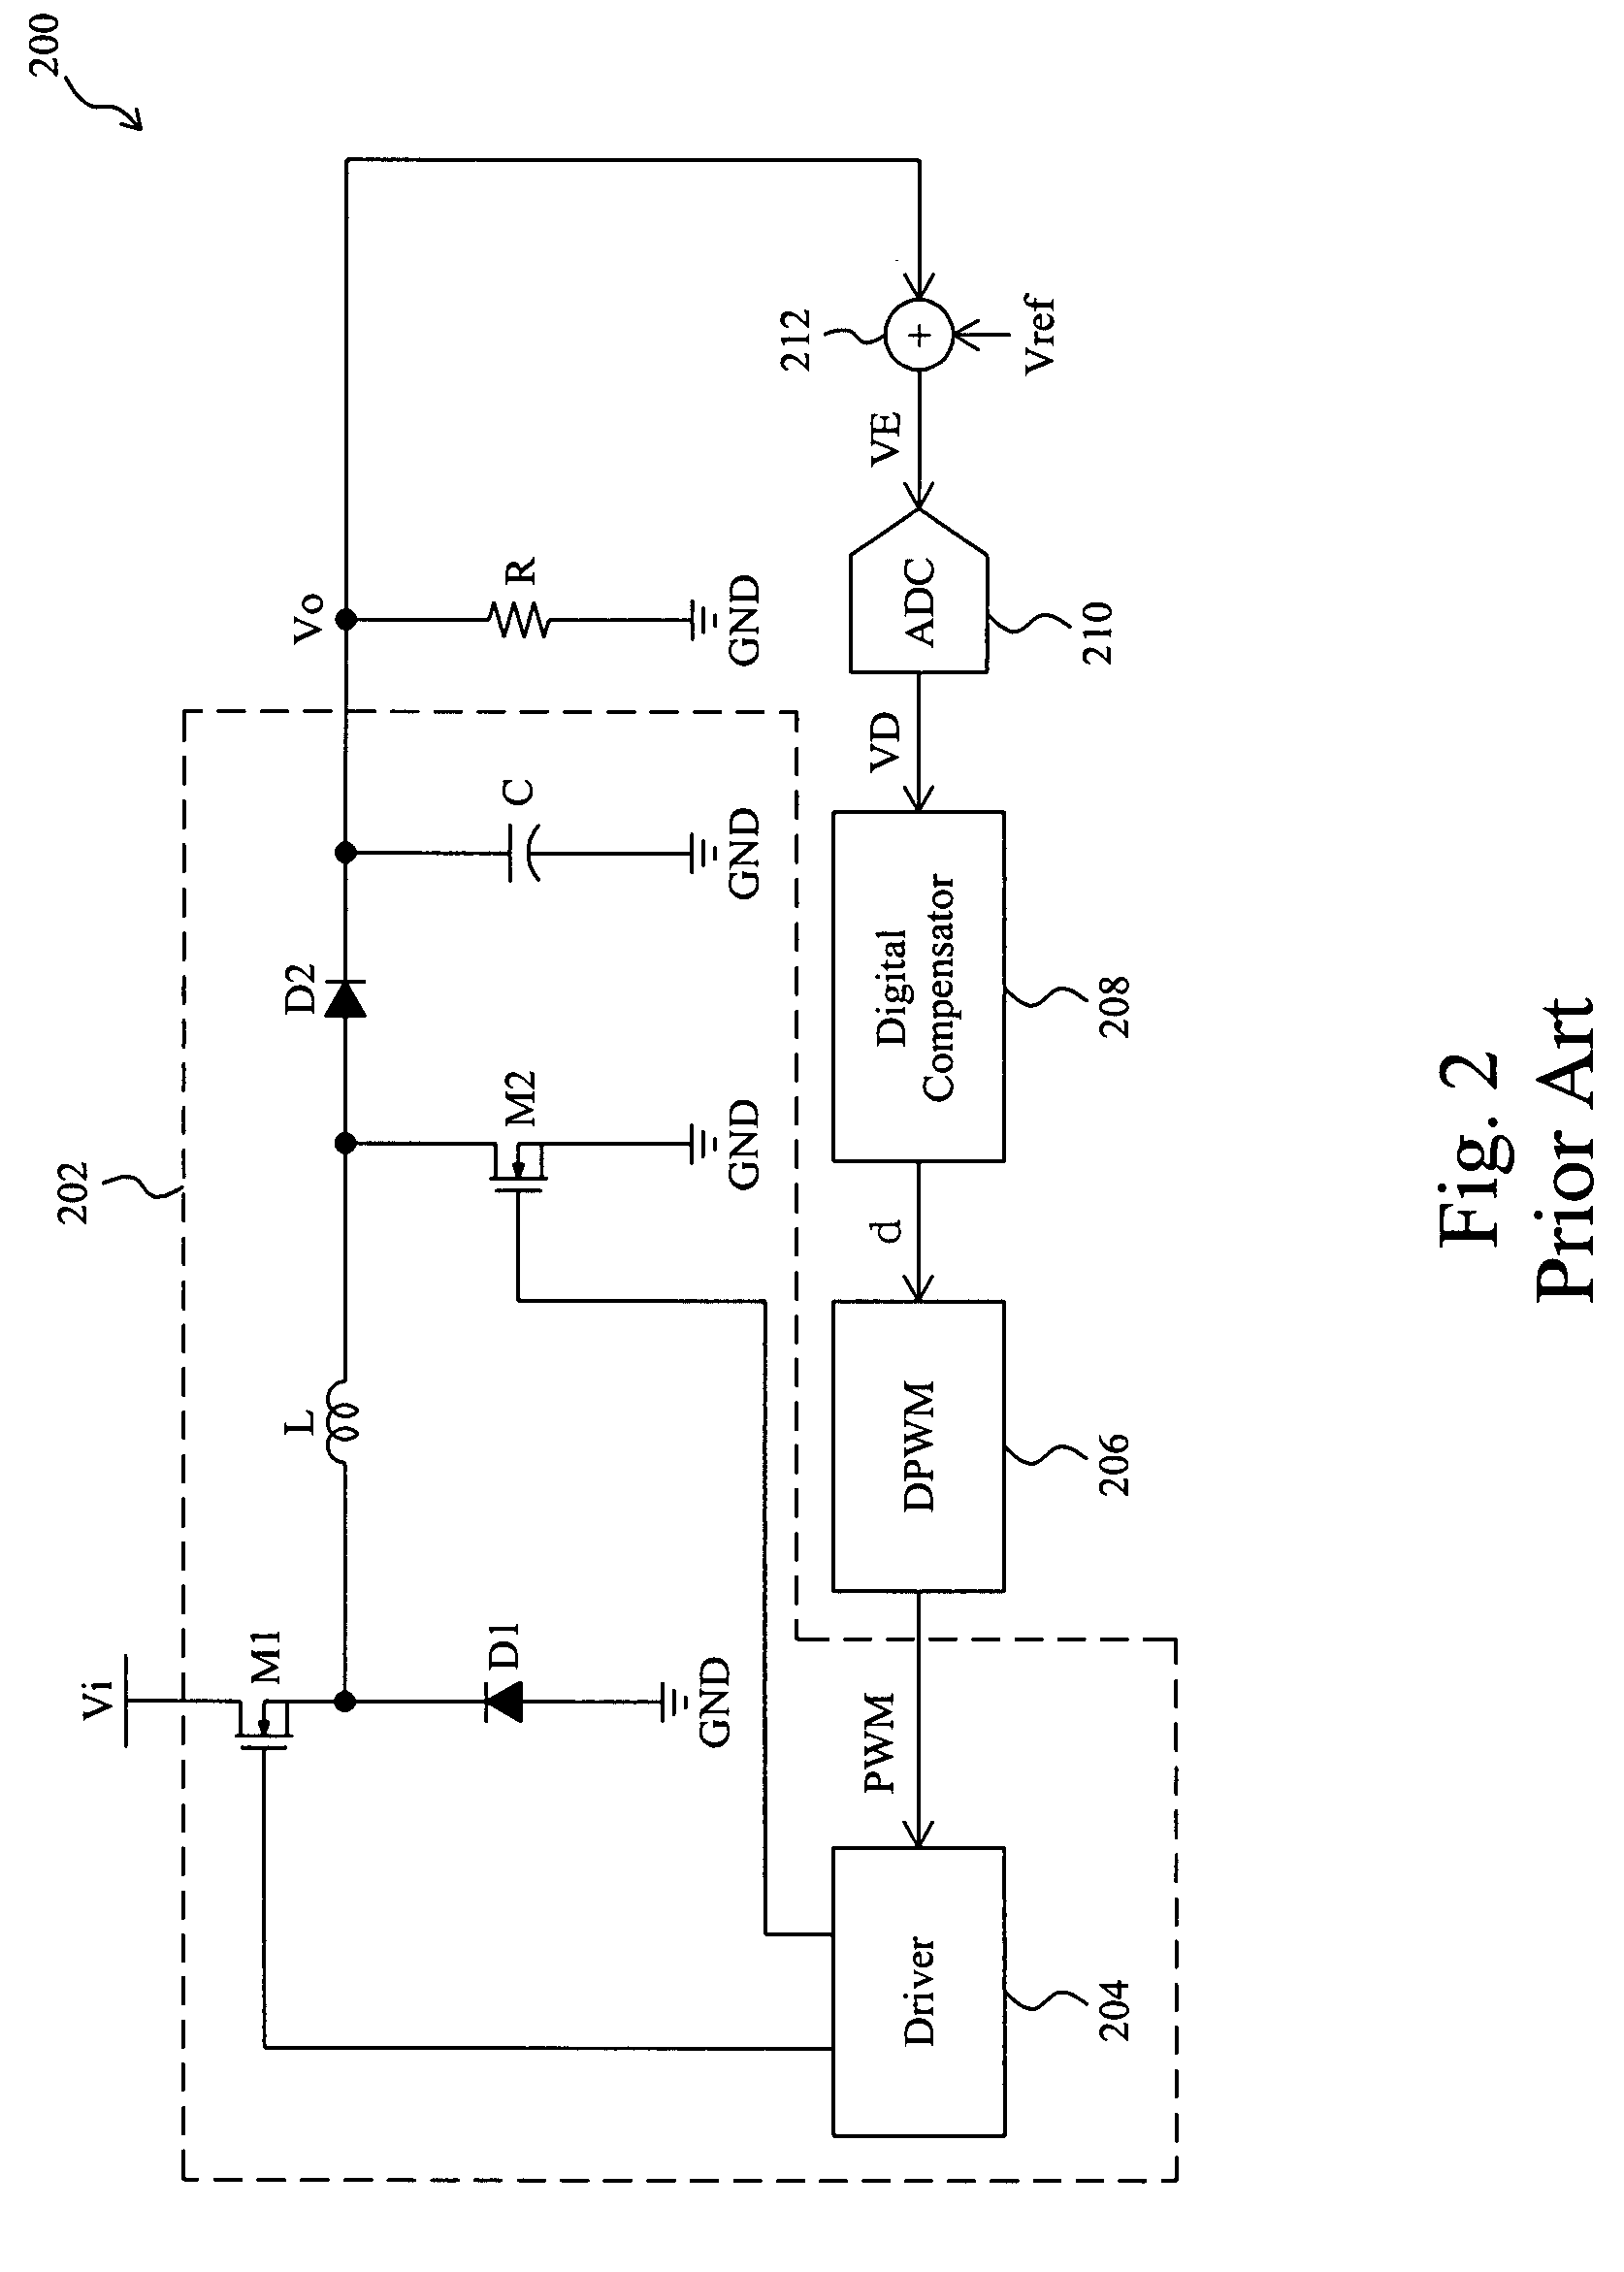 Digital voltage converter with constant off-time and variable on-time of controller